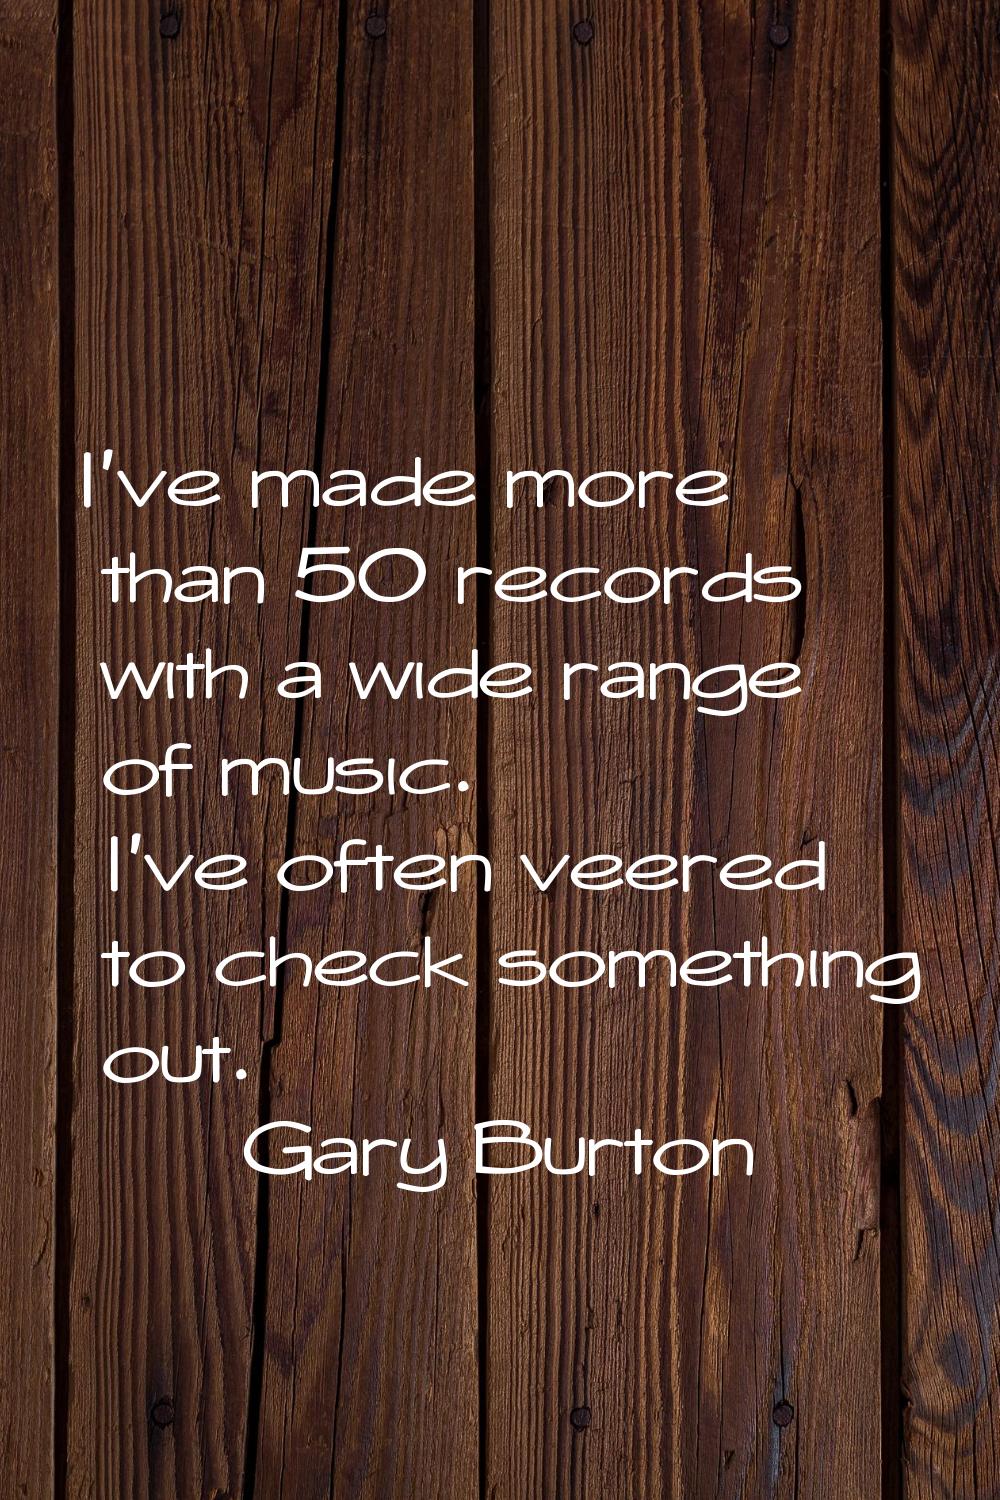 I've made more than 50 records with a wide range of music. I've often veered to check something out